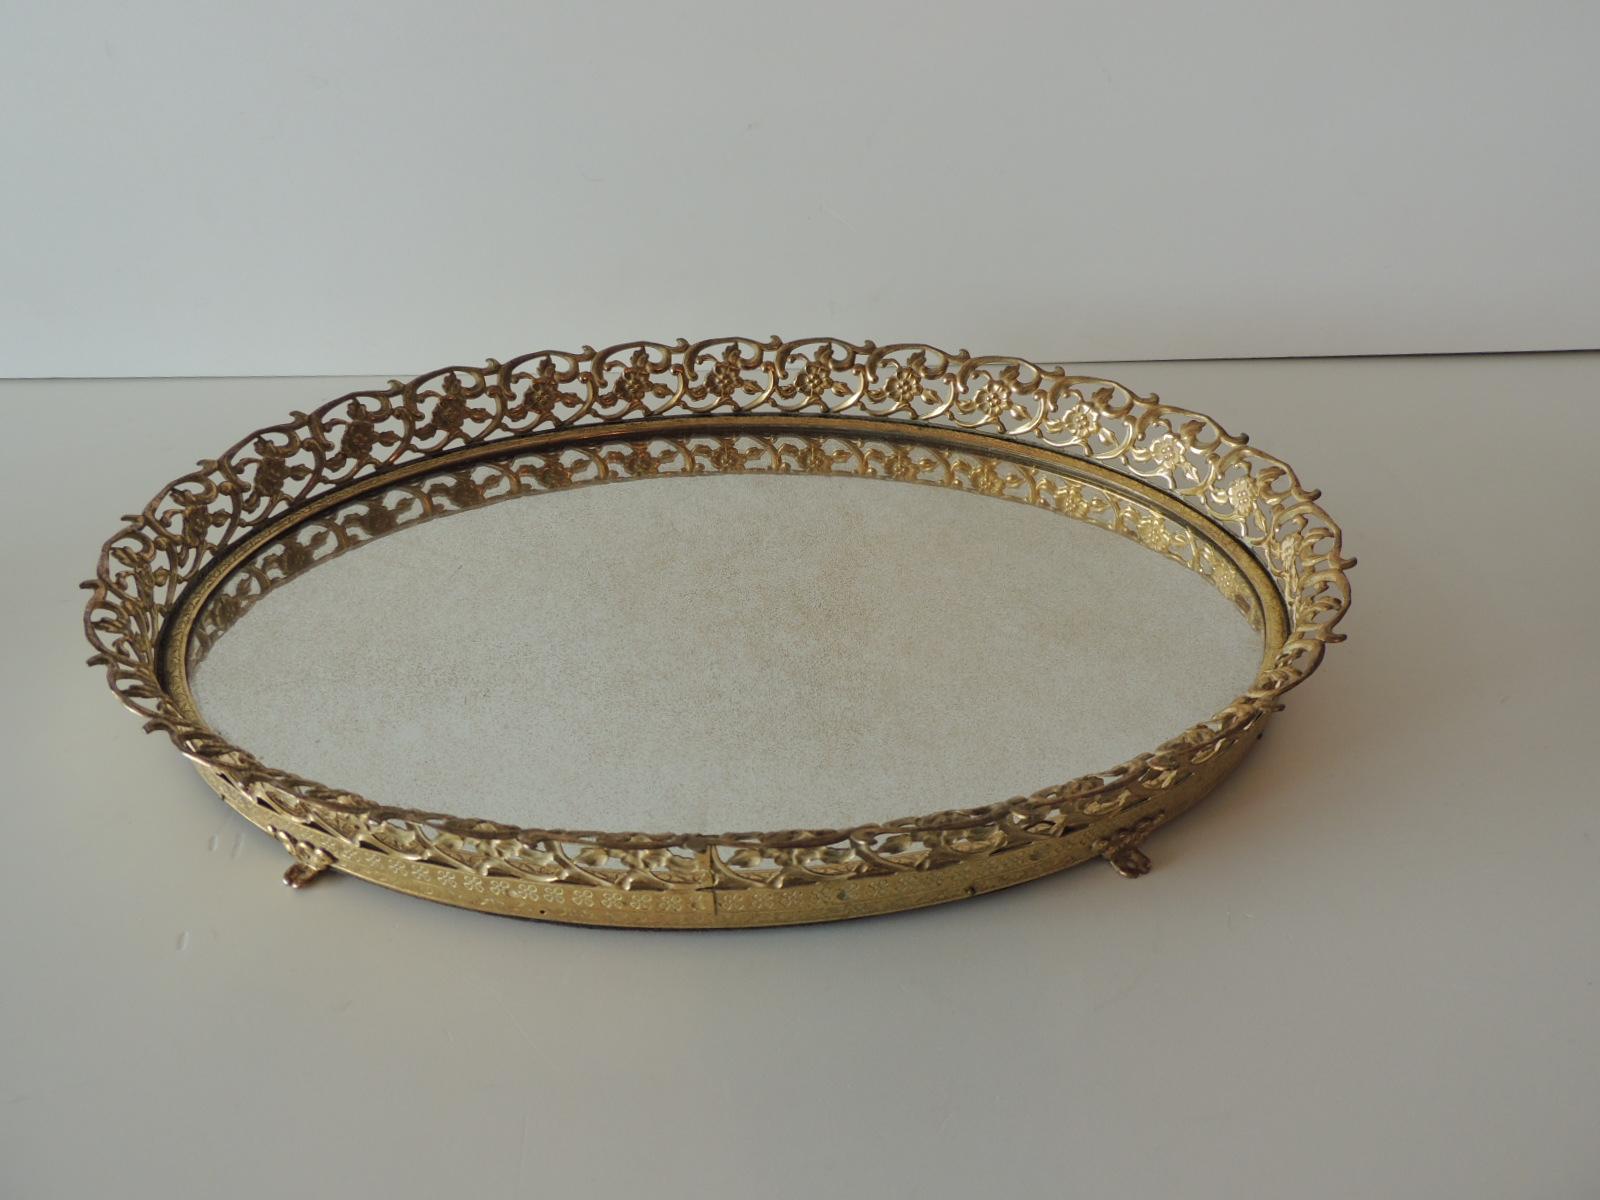 Vintage gold tone filigree oval brass footed vanity tray with mirror
floral pierced tray edge with oval antique finished mirror inset. Felt backing.
Size: 14